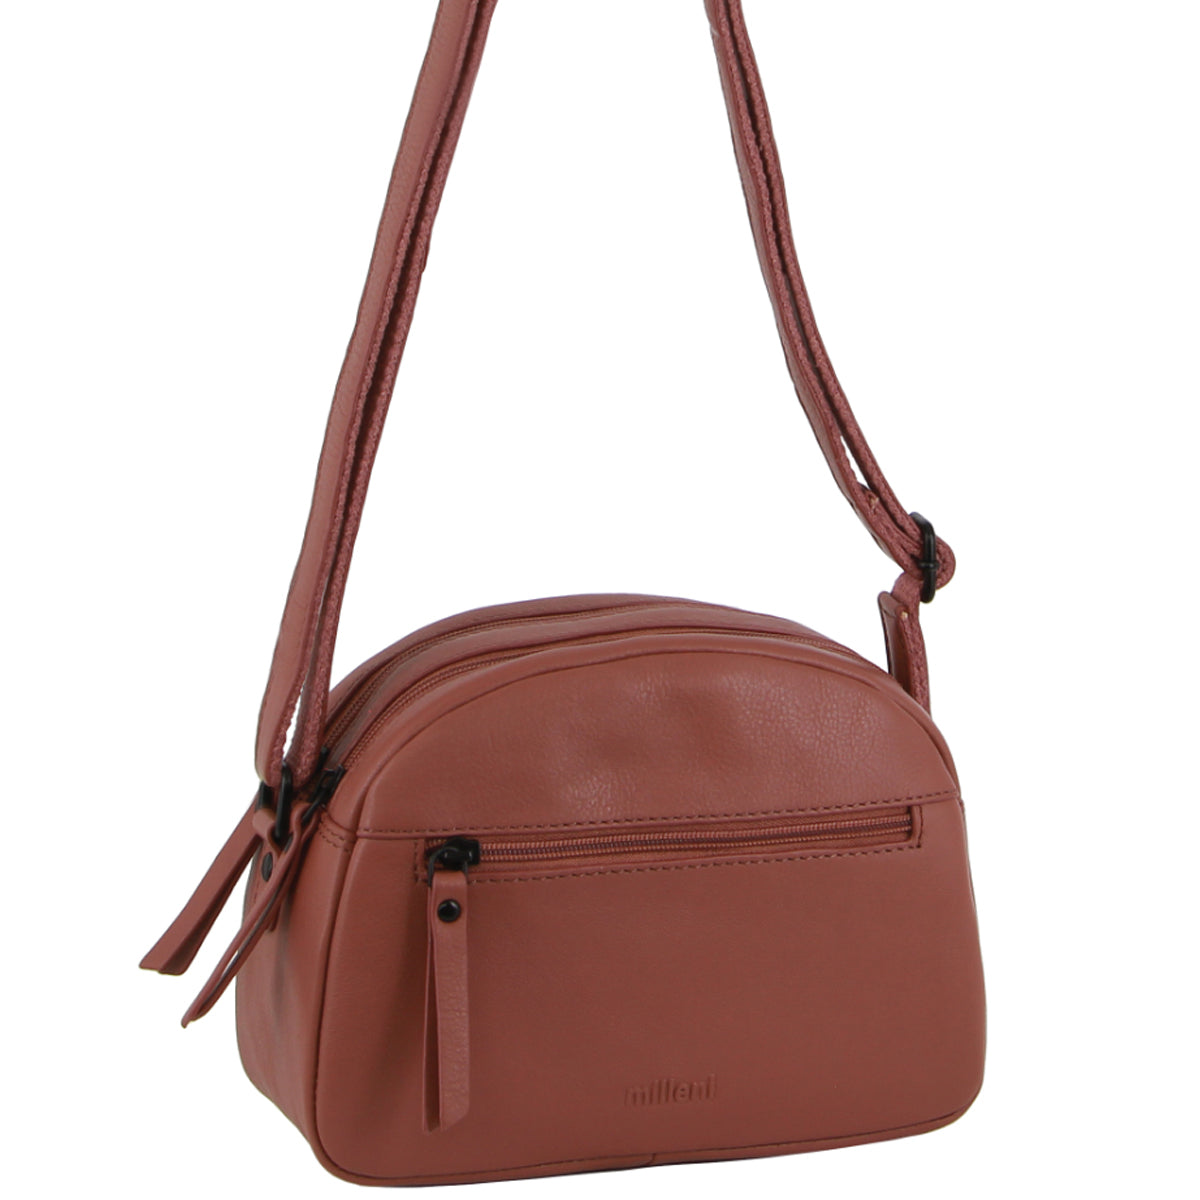 Milleni - NL3869 Small rounded leather sidebag - Rose-3